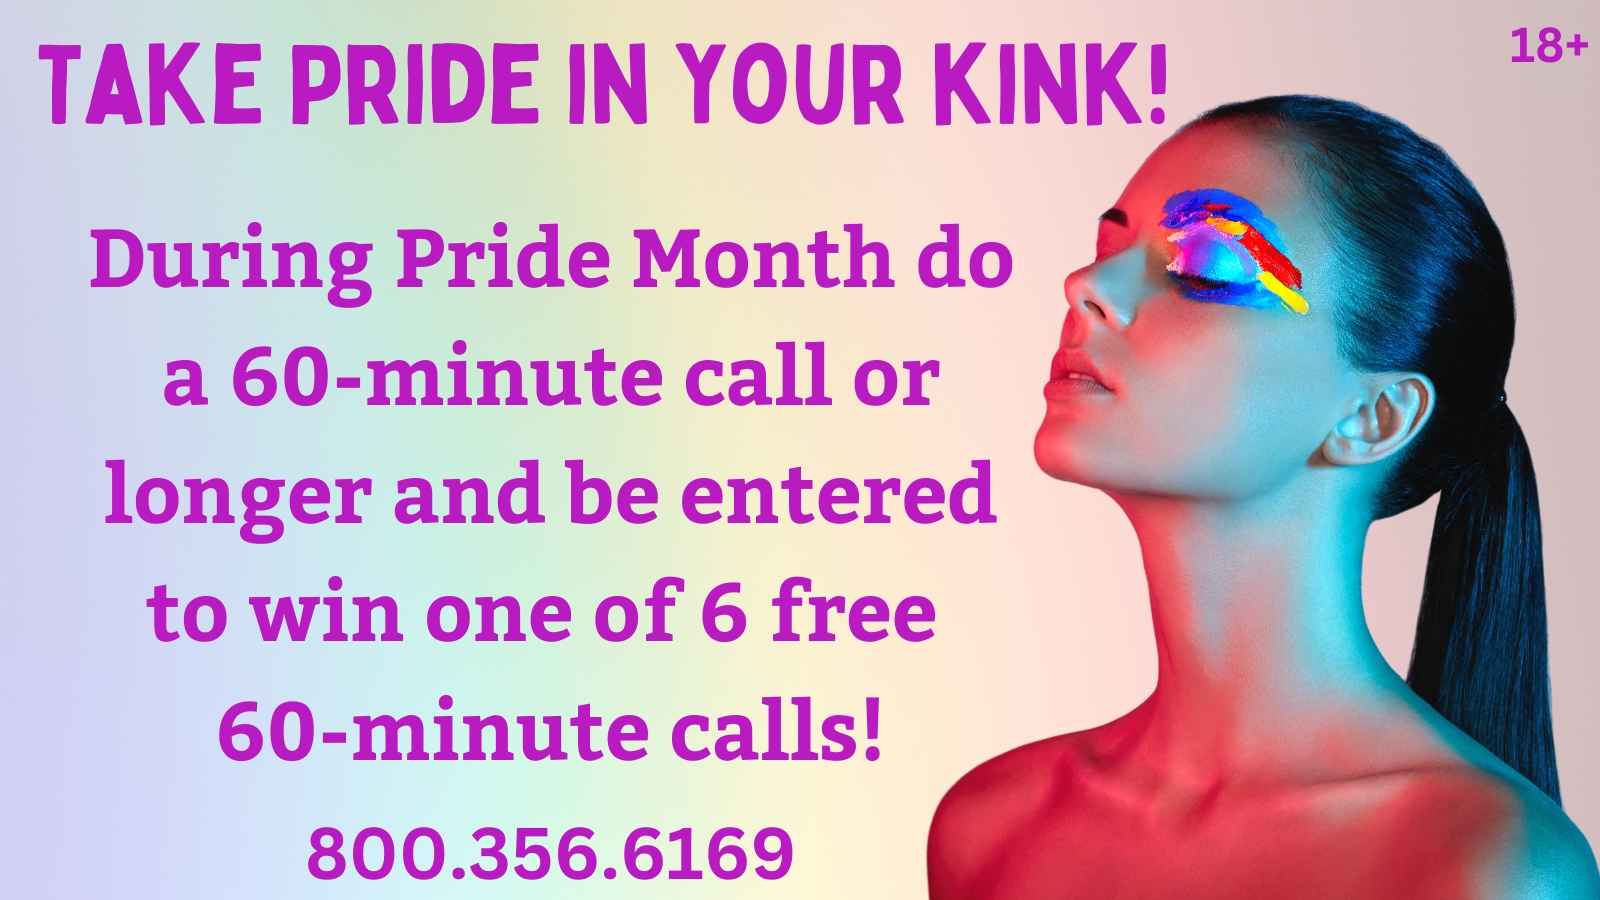 Take Pride in your kink with Goddess Rachel! 1-800-356-6169